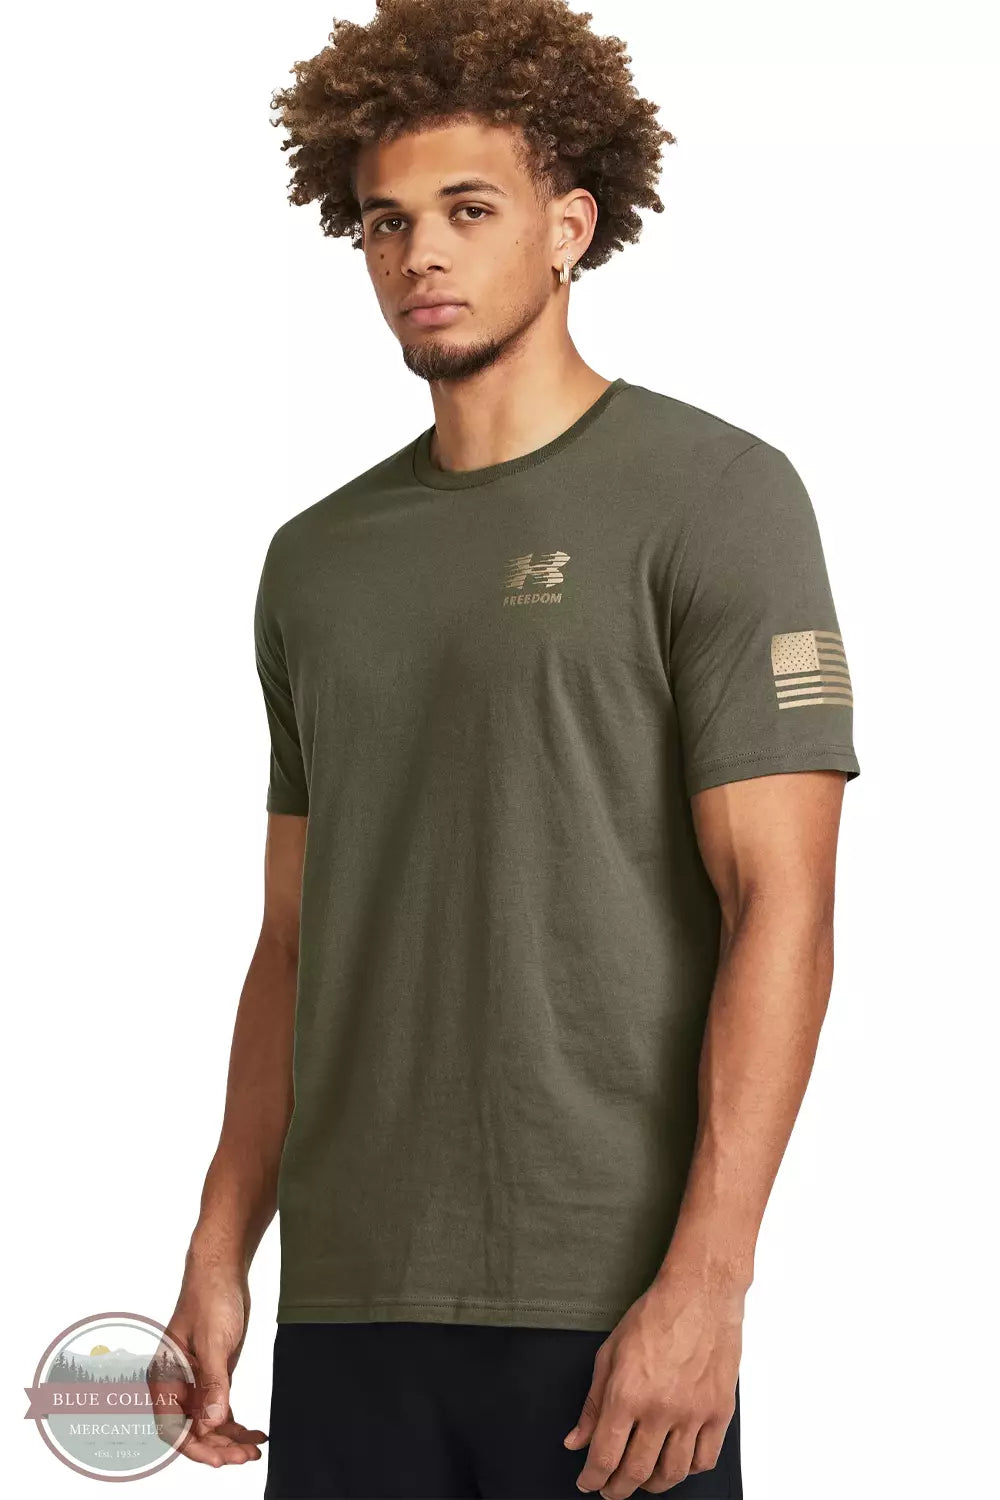 Under Armour 1382972 Freedom Spine T-Shirt Front View